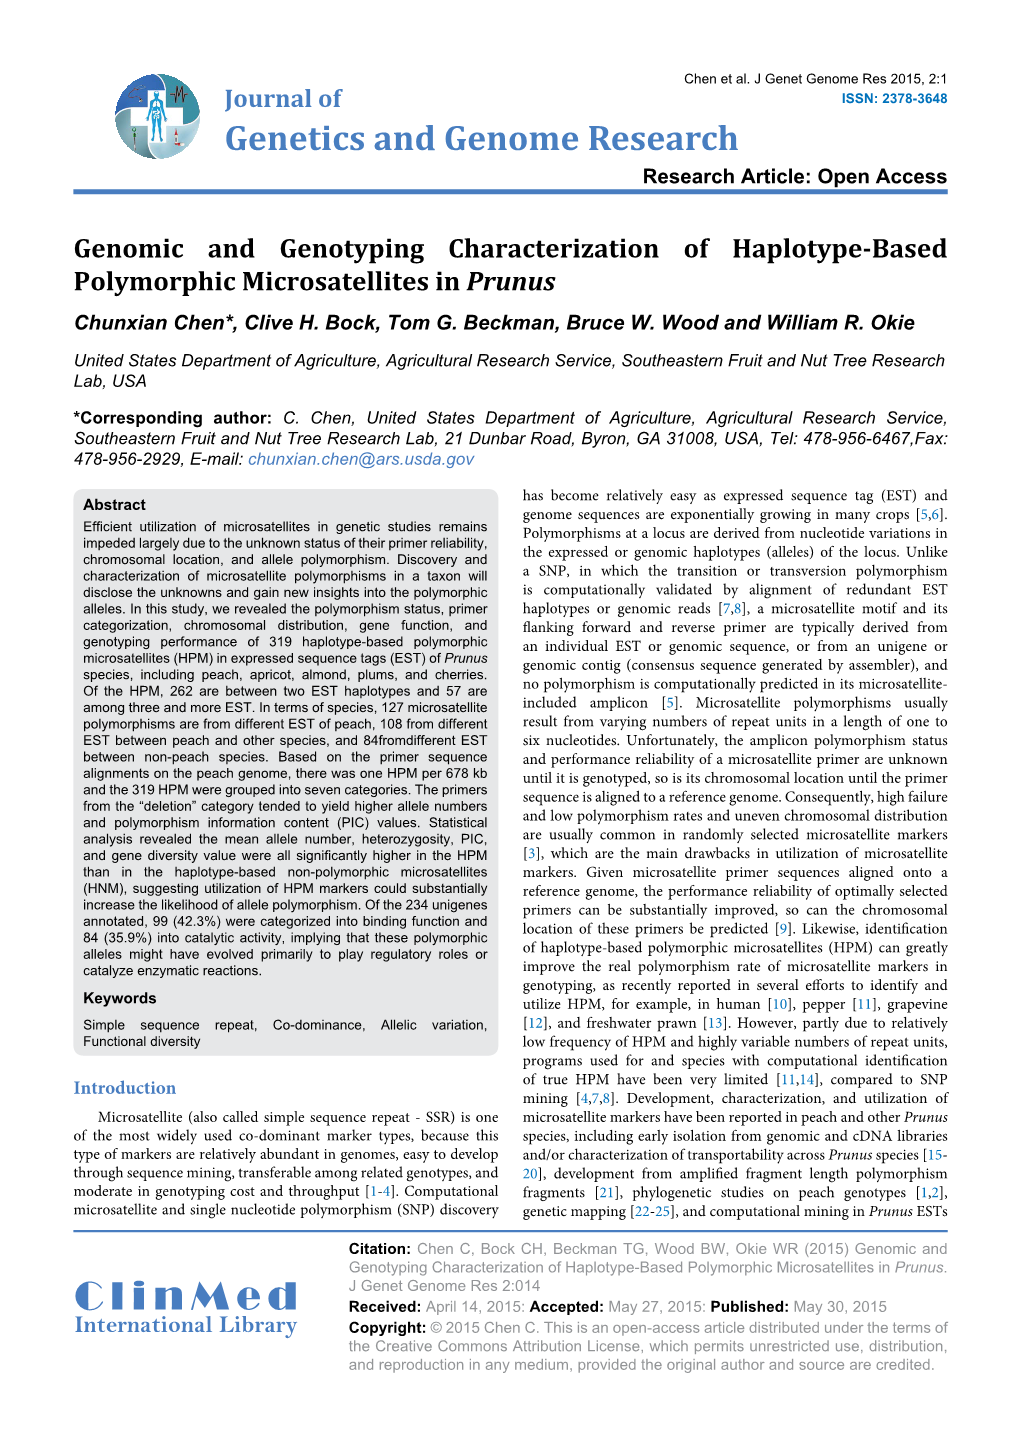 Genomic and Genotyping Characterization of Haplotype-Based Polymorphic Microsatellites in Prunus Chunxian Chen*, Clive H